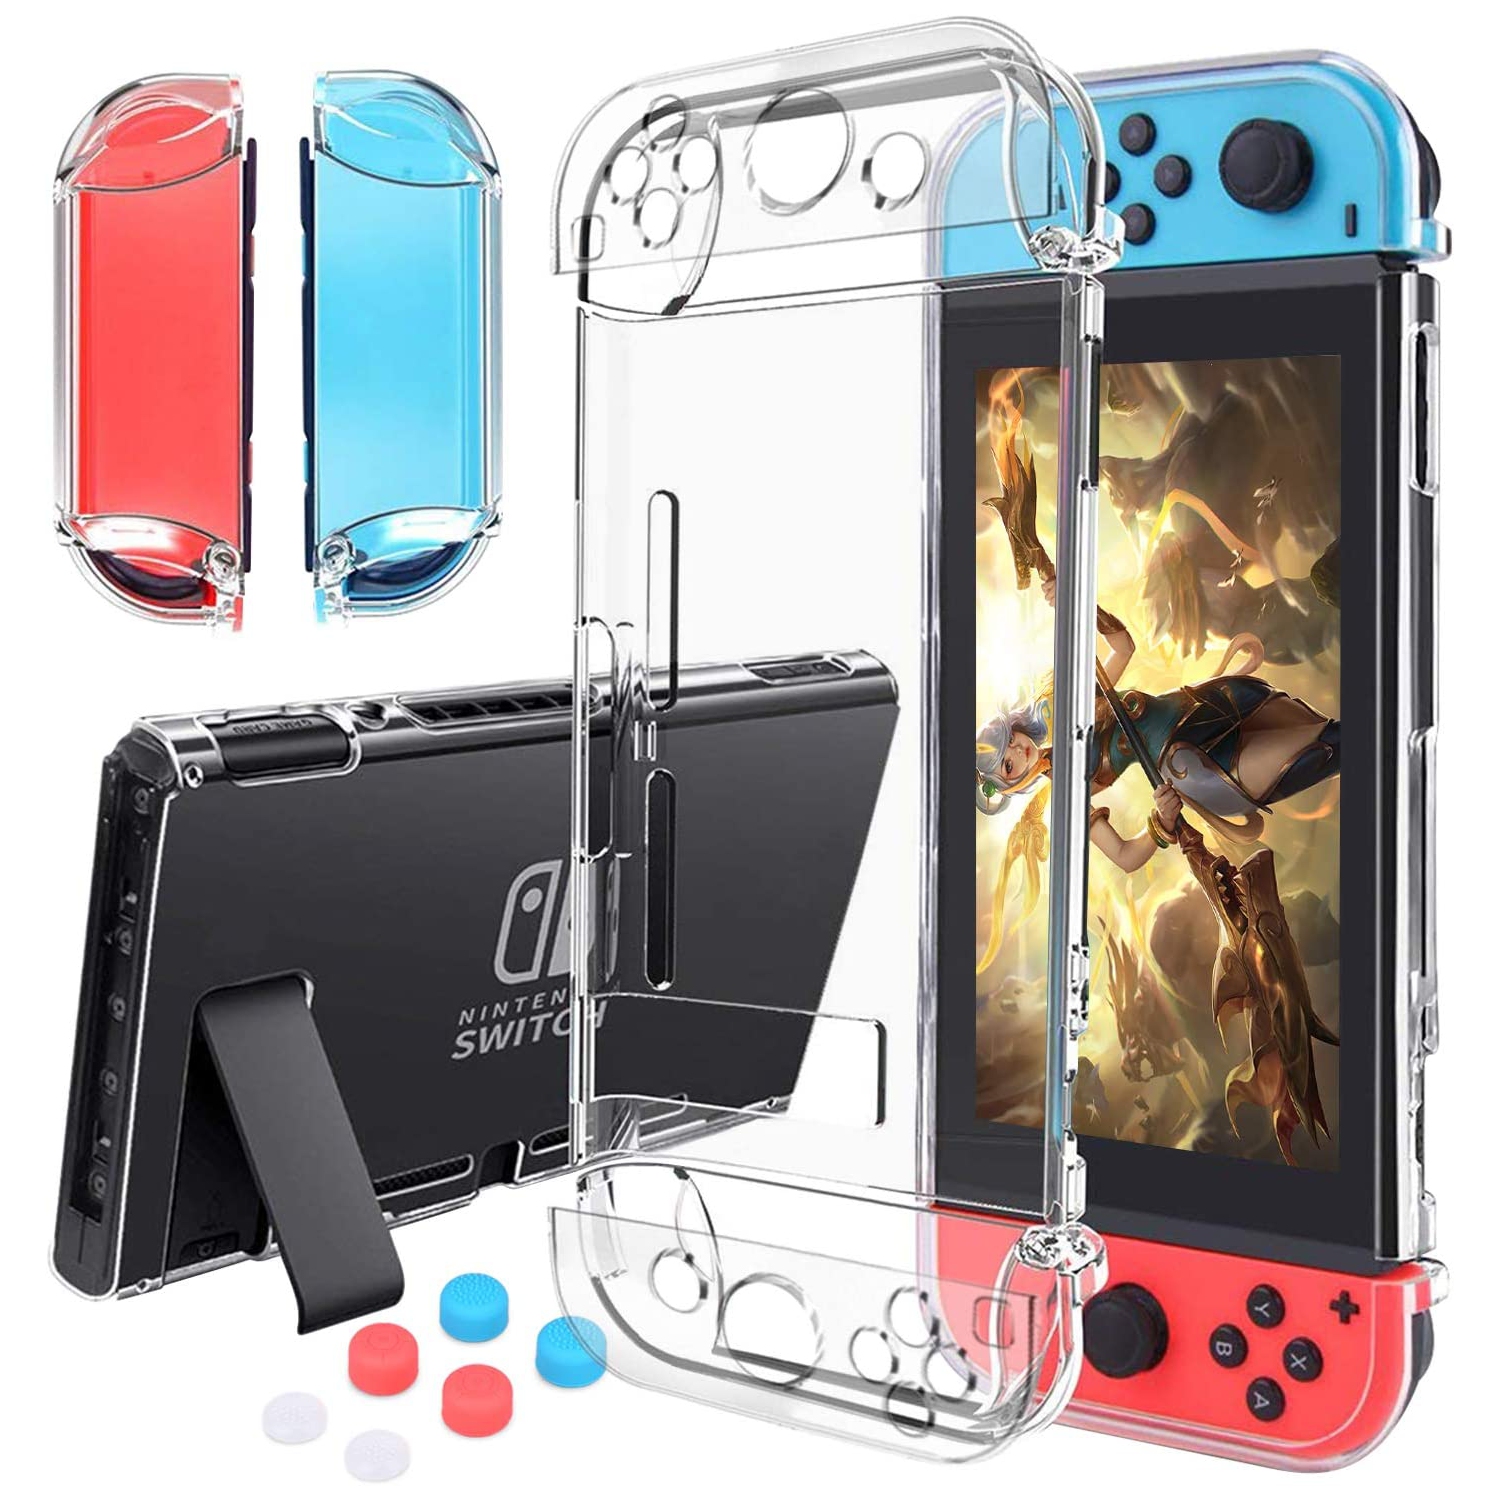 Case Compatible with Nintendo Switch,Case Updated Version Dockable and Scratch Free Ultra Slim Protective Cover Case with 6 Thumb Grips Caps Compatible with Nintendo Switch Console